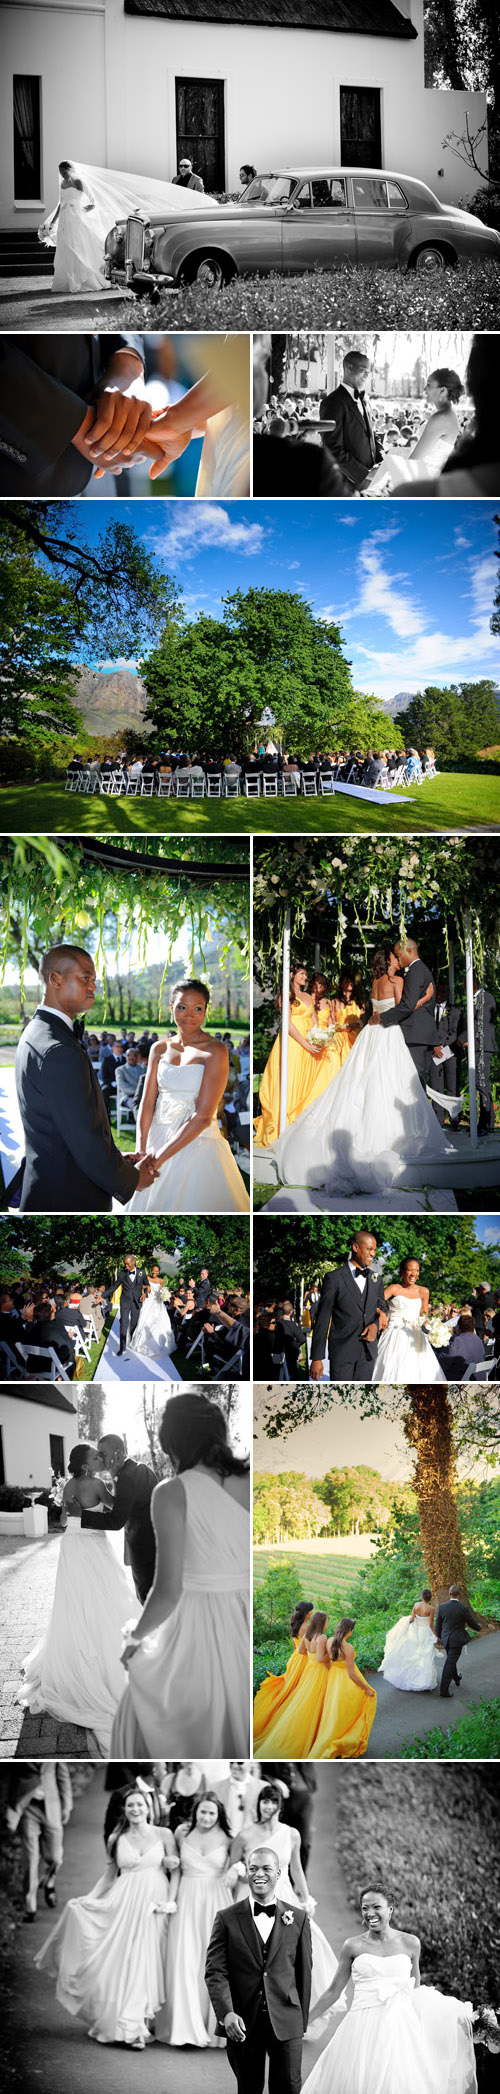 real outdoor wedding ceremony in south africa, images by jean pierre uys photography